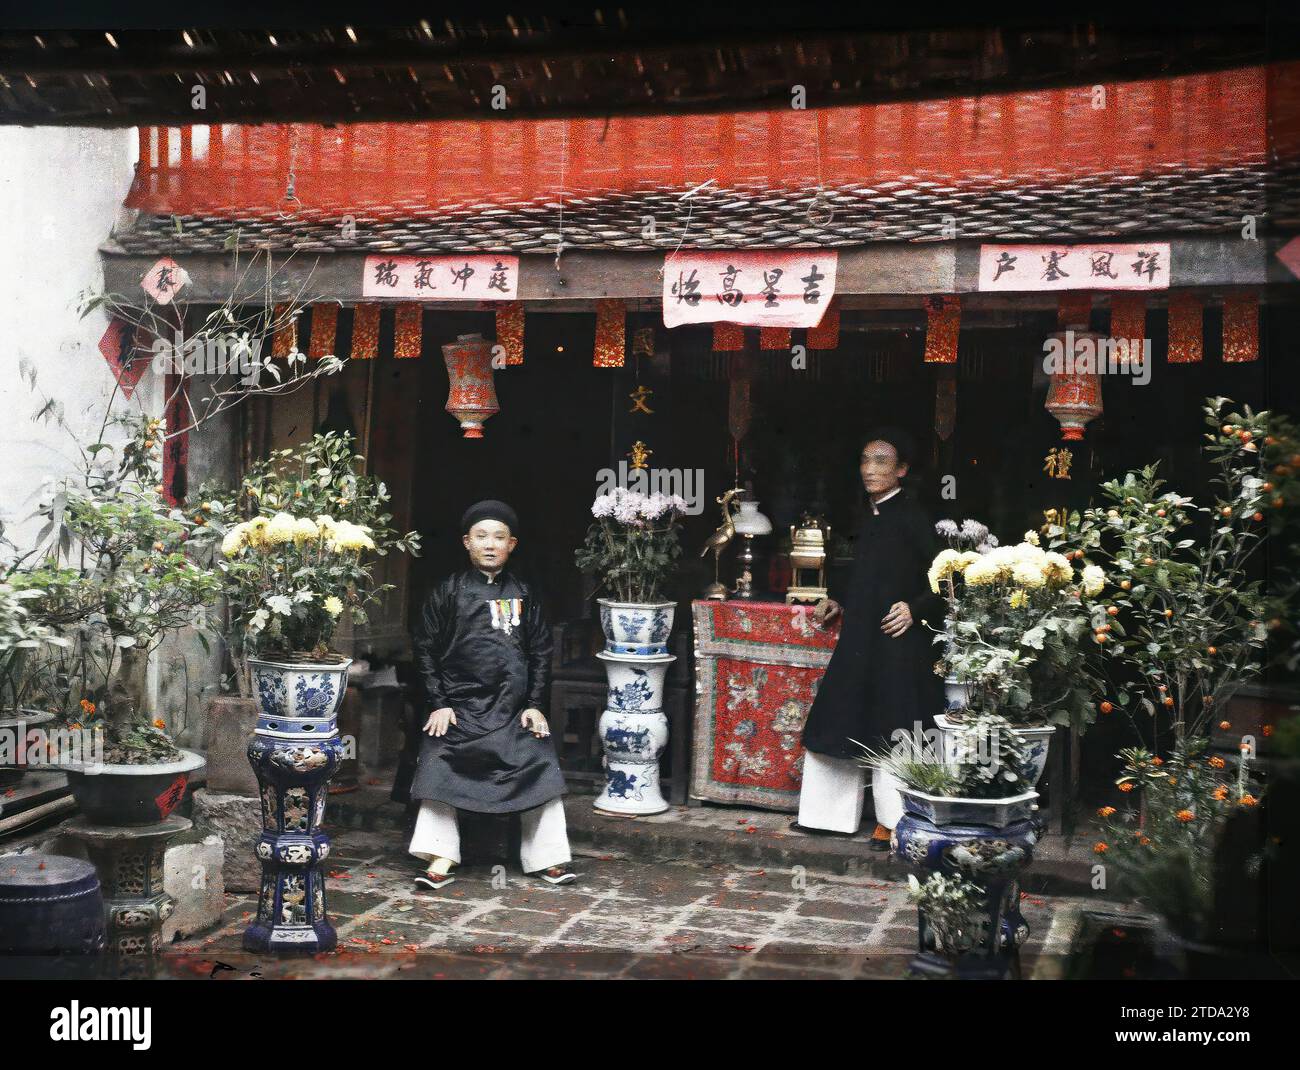 Hà-nôi, Hainoi Vietnam, Tonkin, Indochina Two notables in front of the ancestral altar in the courtyard of a wealthy house, decorated with pots of chrysanthemums, at the time of the Têt festival, Festival, Clothing, Religion, Human beings, Habitat, Architecture, Inscription, information, Popular festival, Costume, New Year, Ancestor worship, Lampion, Chrysanthemum, Portrait, Altar, Vase, Dwelling, Religious or votive inscription, Furniture, Flower, Ceramics, Medal, decoration, Hairstyle, headgear, Courtyard, Smoker, Man, Indochina, Tonkin, Hanoi, Courtyard of the same house in Hanoi at the tim Stock Photo